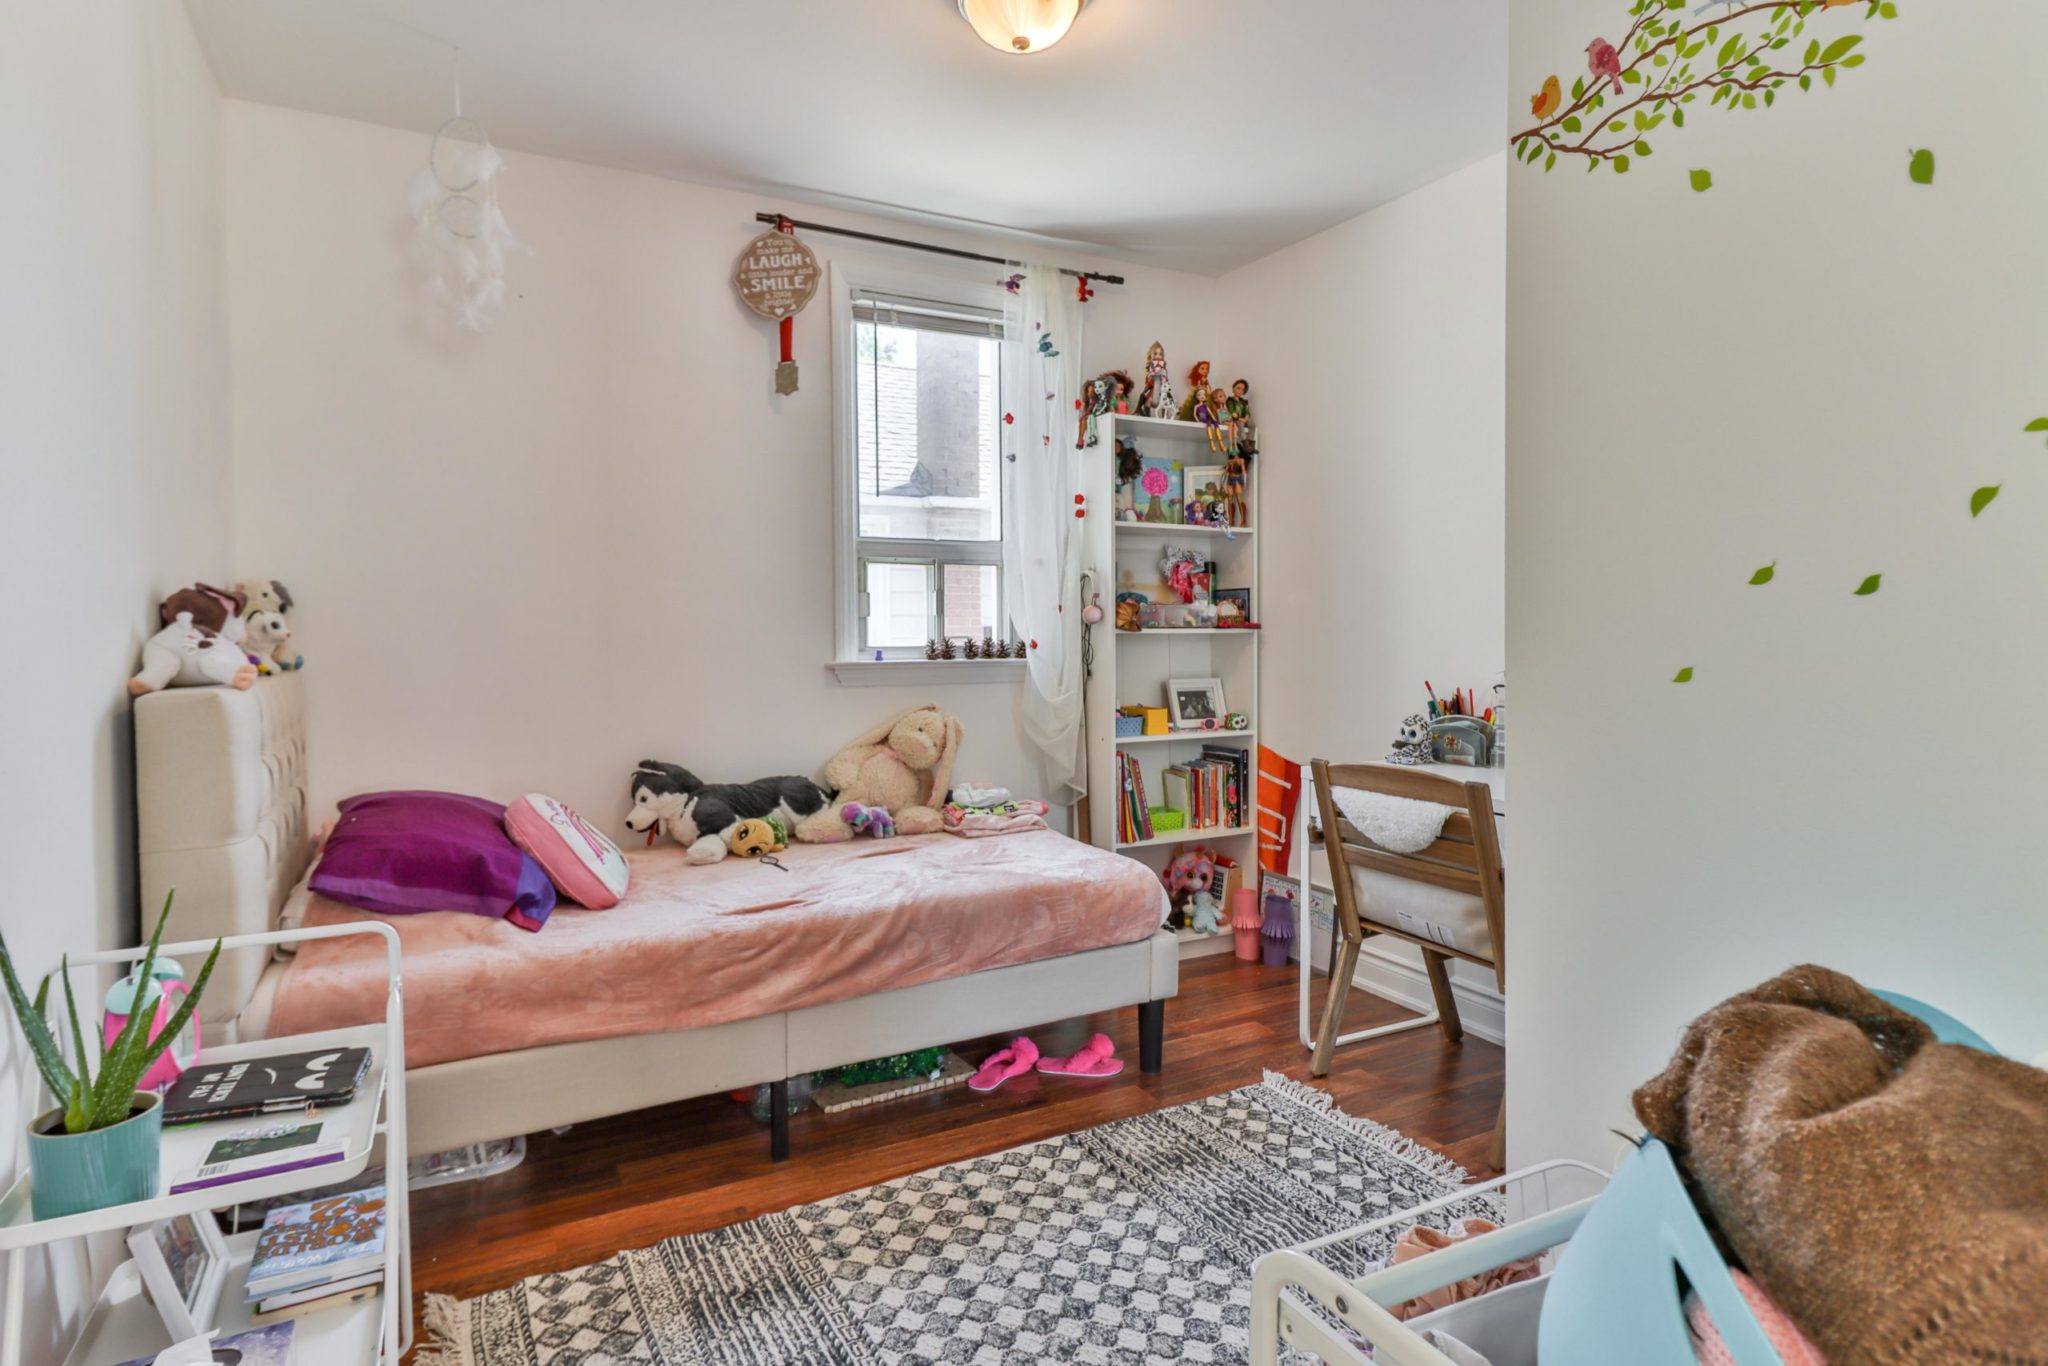 Girl's bedroom with pink walls, bookcase with dolls and stuffed animals on bed.